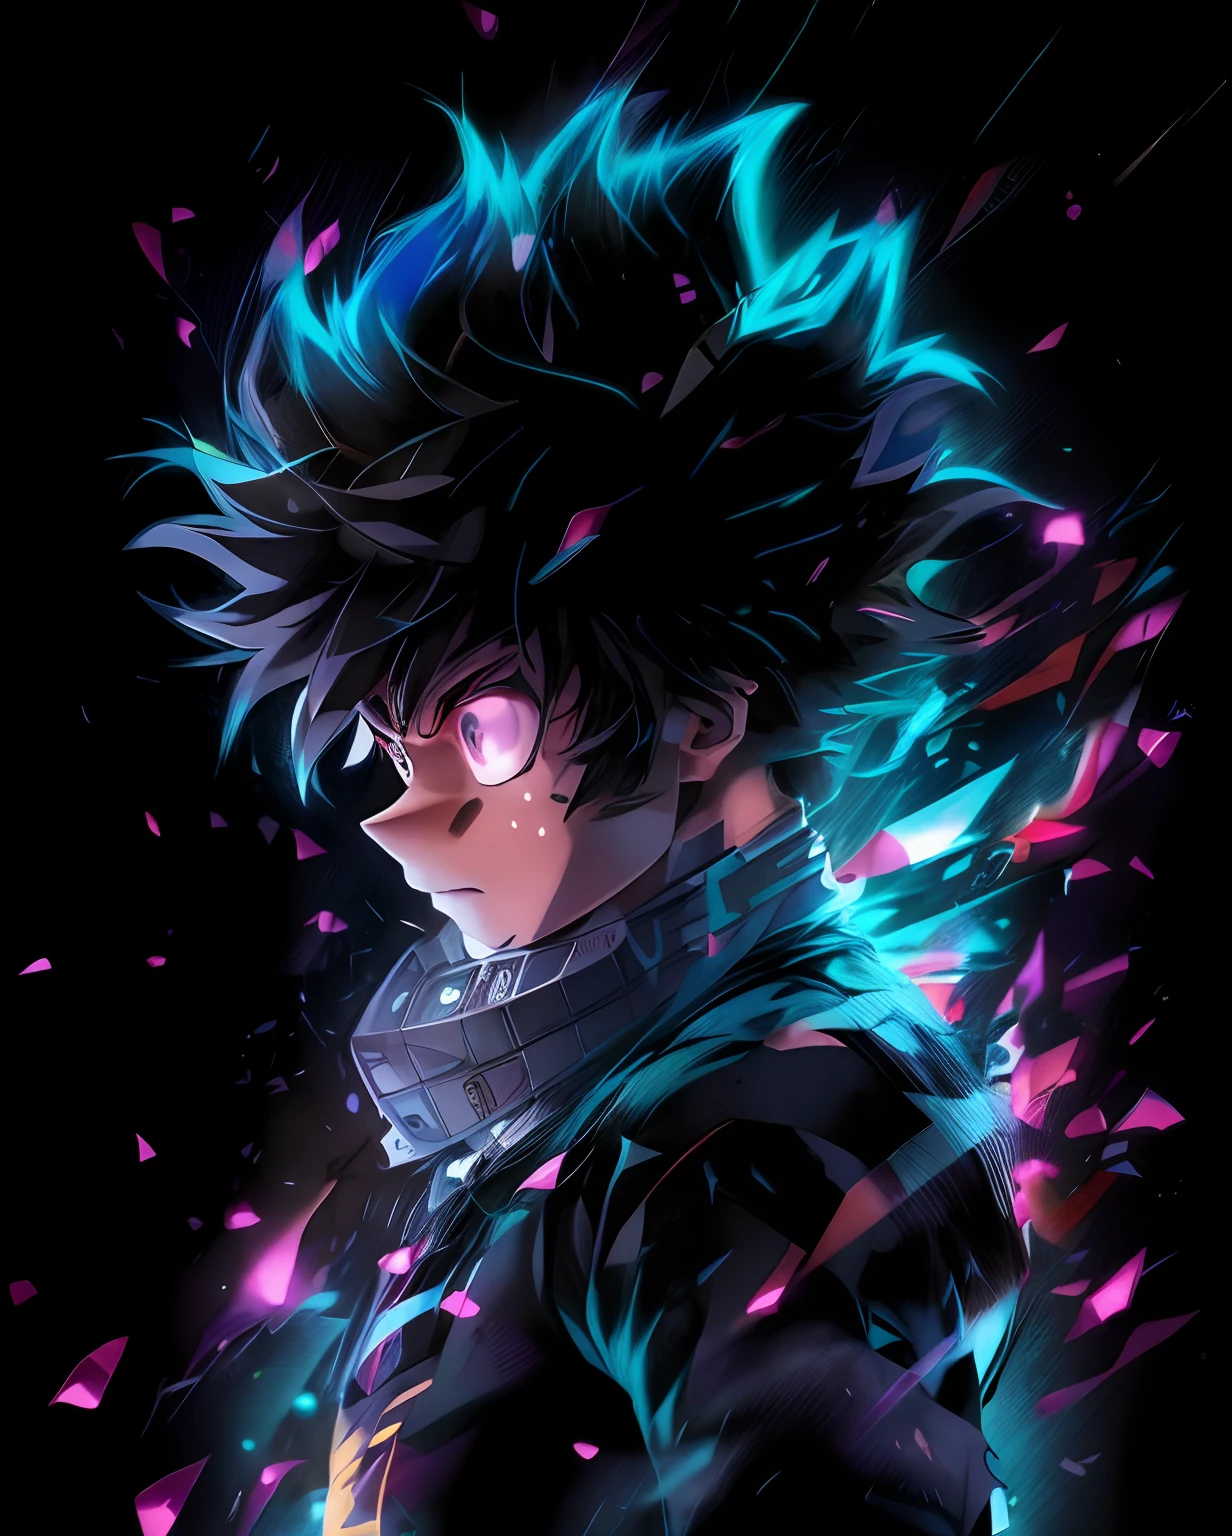 anime boy with a black background and colorful lights, 4k anime wallpapers, 4k anime wallpapers, Anime Art Wallpaper 4K, Anime Art Wallpaper 4K, 坏蛋动漫8 K, 4k anime wallpaper, Anime Art Wallpaper 8K, 4 k manga wallpaper, 4K anime-style, Anime Wallaper, Local art, ultra hd anime wallpaper, high quality fanart